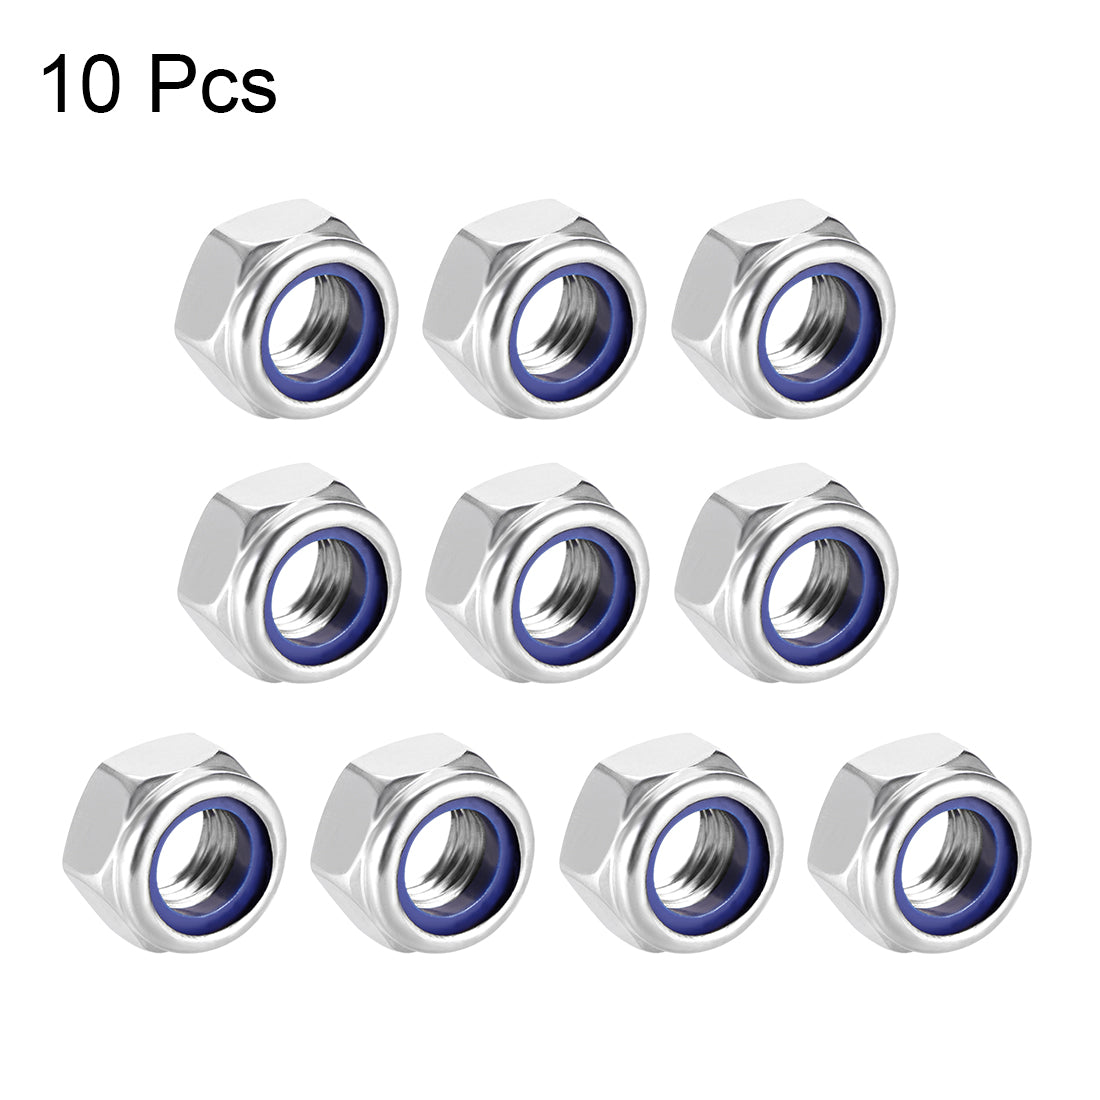 uxcell Uxcell M12x1.75mm Hex Lock Nut Stainless Steel Nylon Insert Self-Lock Nuts 10Pcs Silver